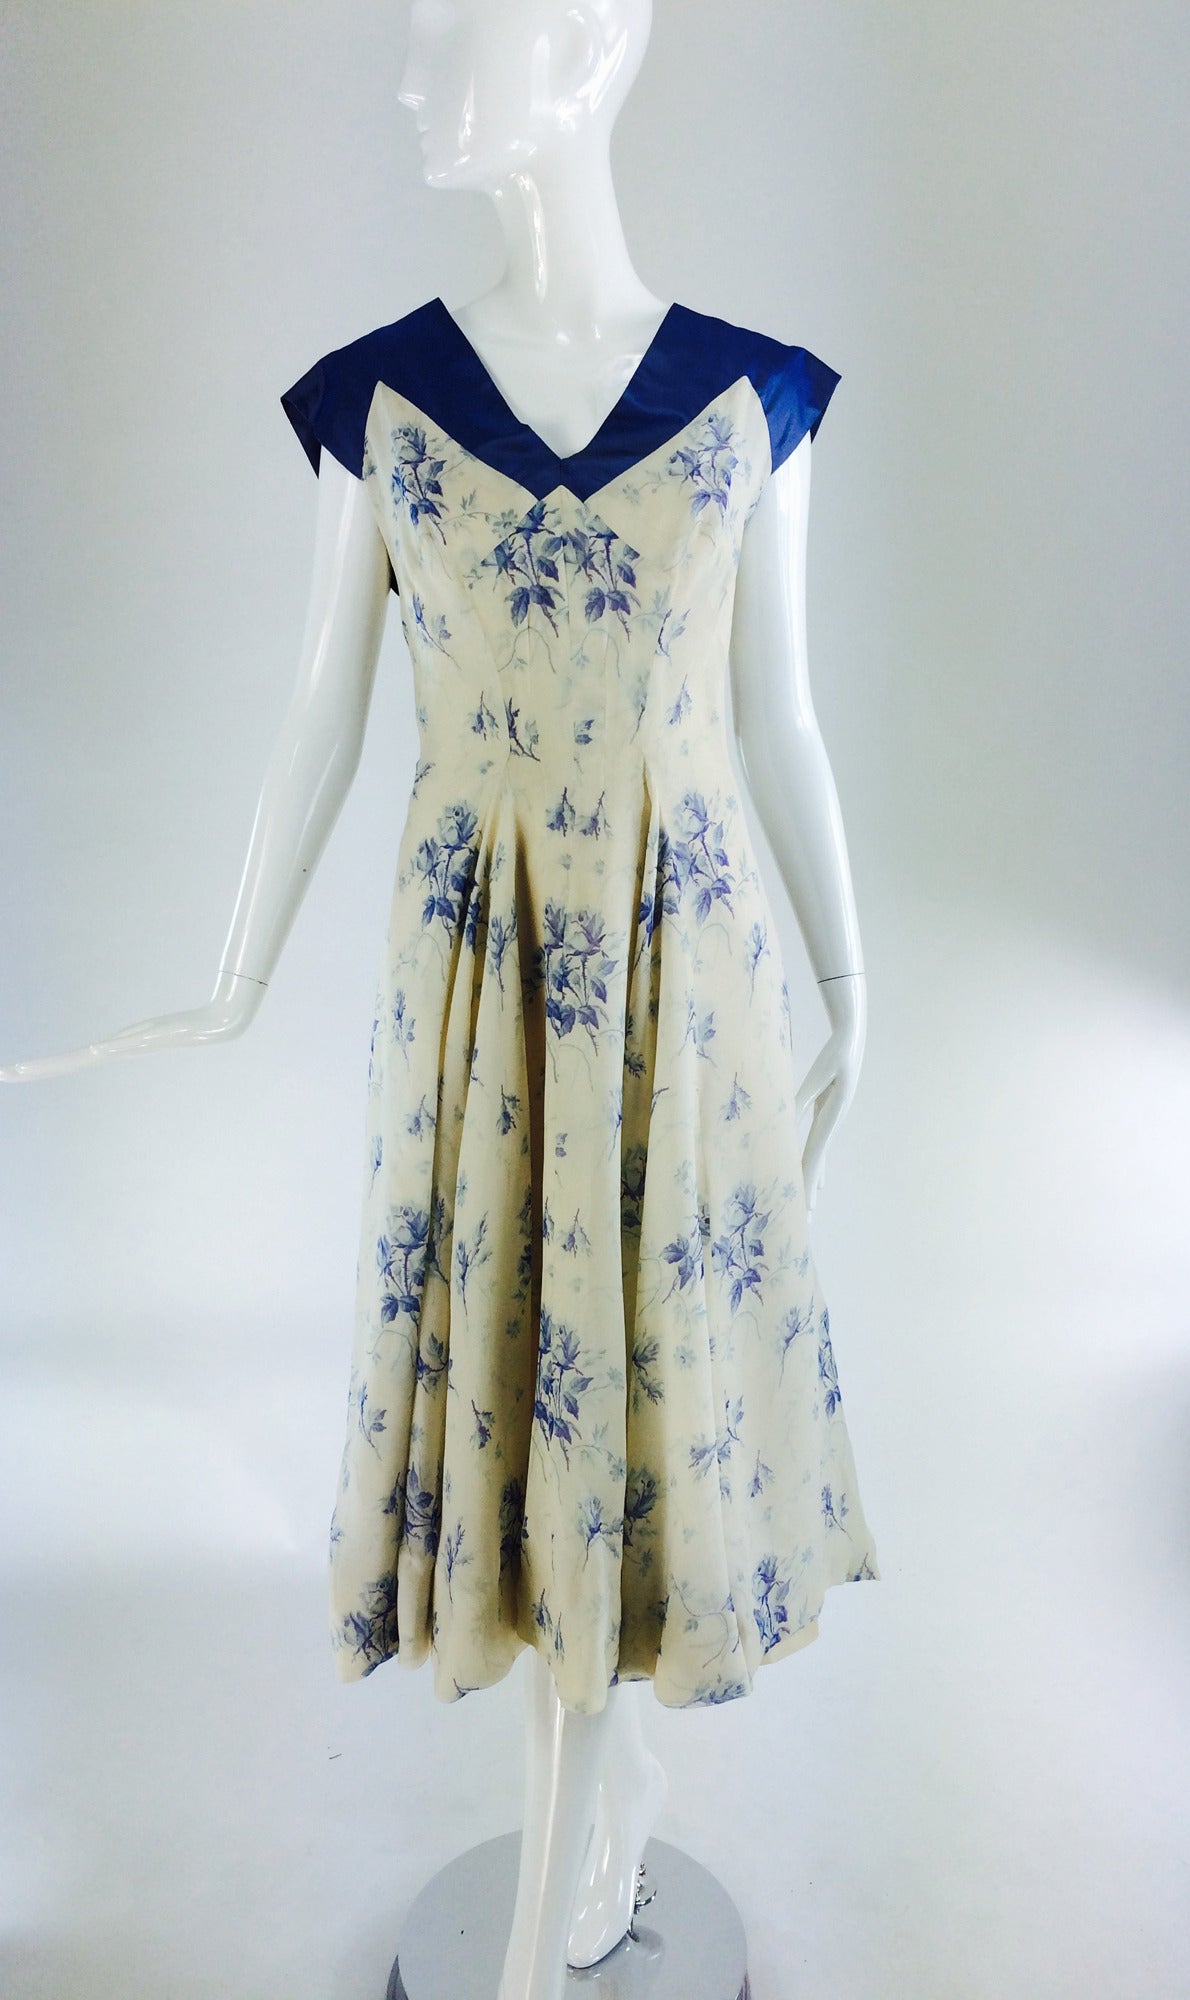 Carven, Paris Haute Couture, from the late 1940s or early 1950s...A dreamy silk chiffon and fine shot silk taffeta afternoon dress...Beautifully hand made...The shoulder, cap sleeves, upper bodice front and back with cross over tabs at the back are